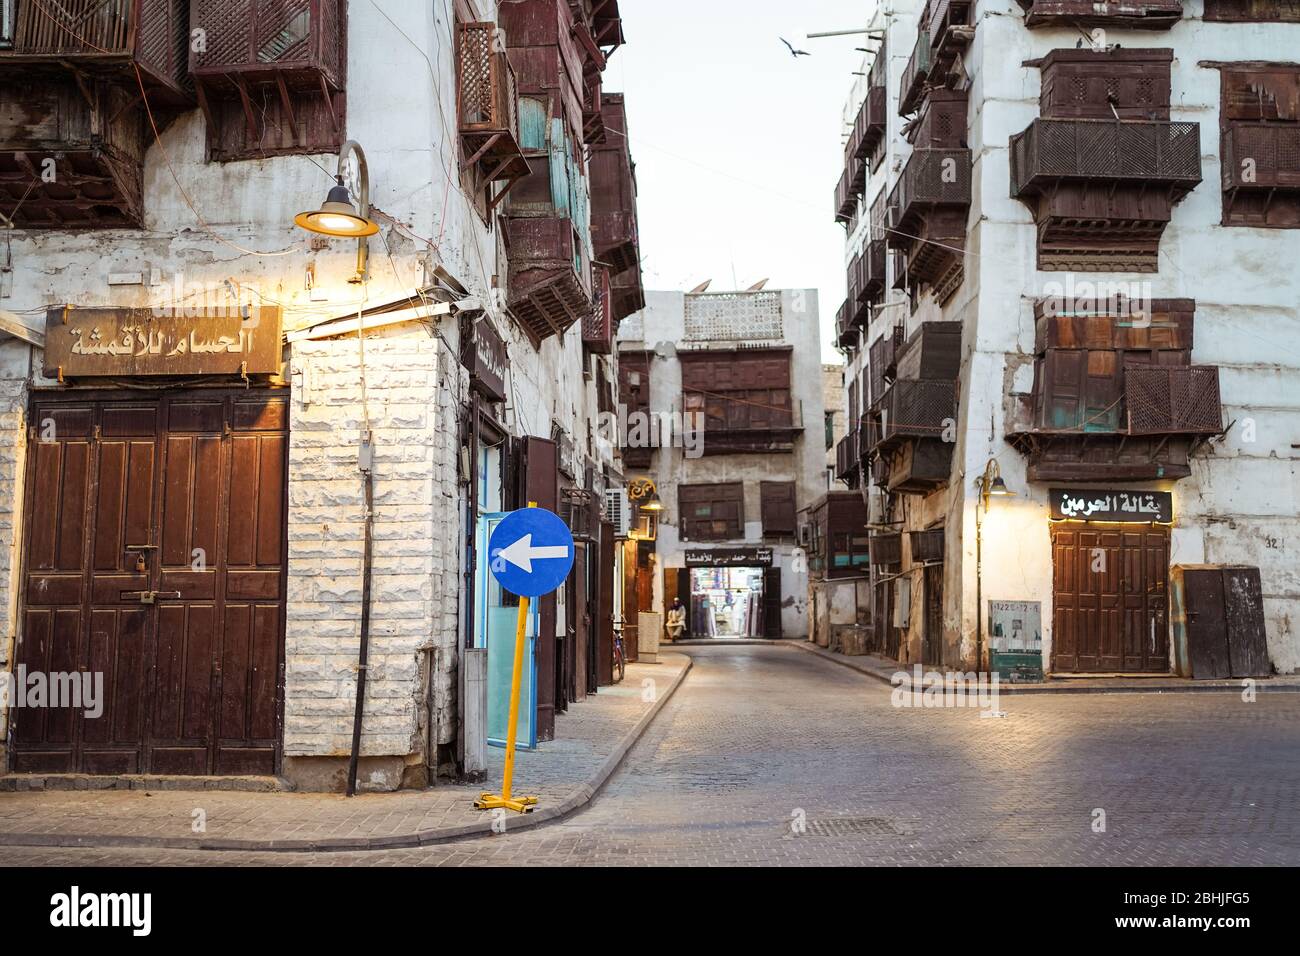 Jeddah / Saudi Arabia - January 16, 2020: Night view of street of old town historic Al-Balad with wooden balconies in buildings Stock Photo